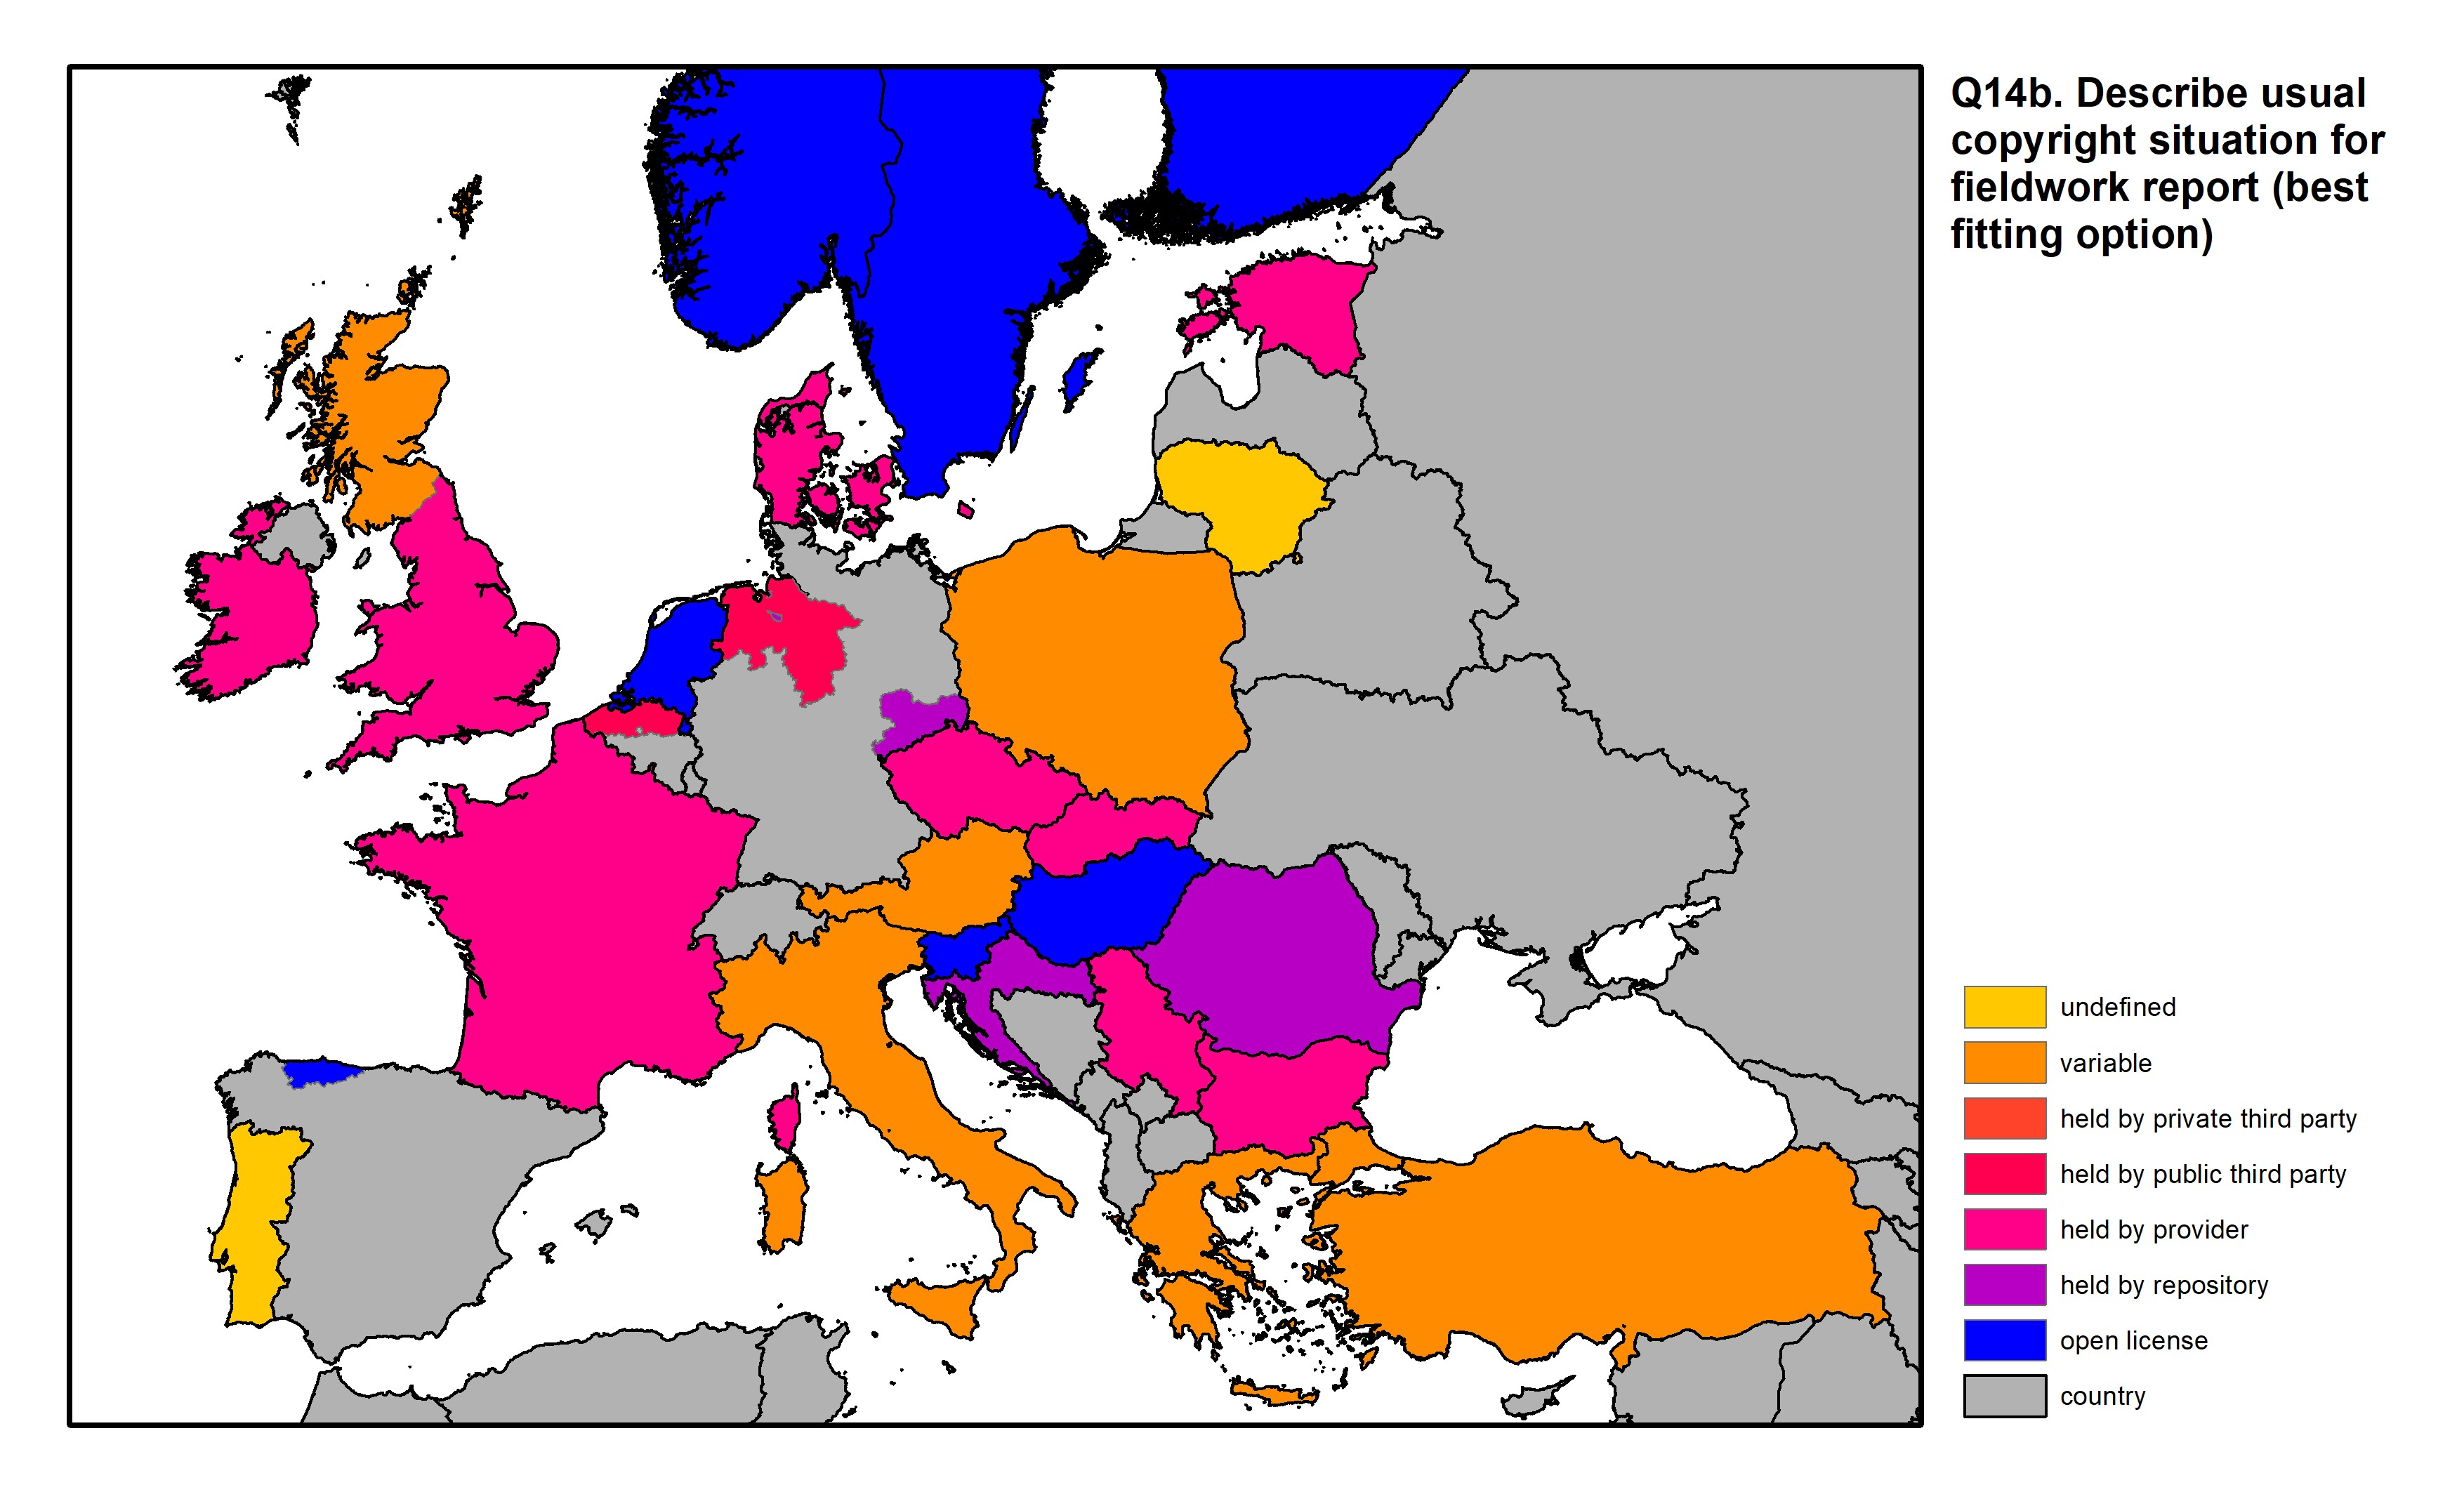 Figure 47: a map of Europe showing countries and regions in colour based on response rates to the survey question.